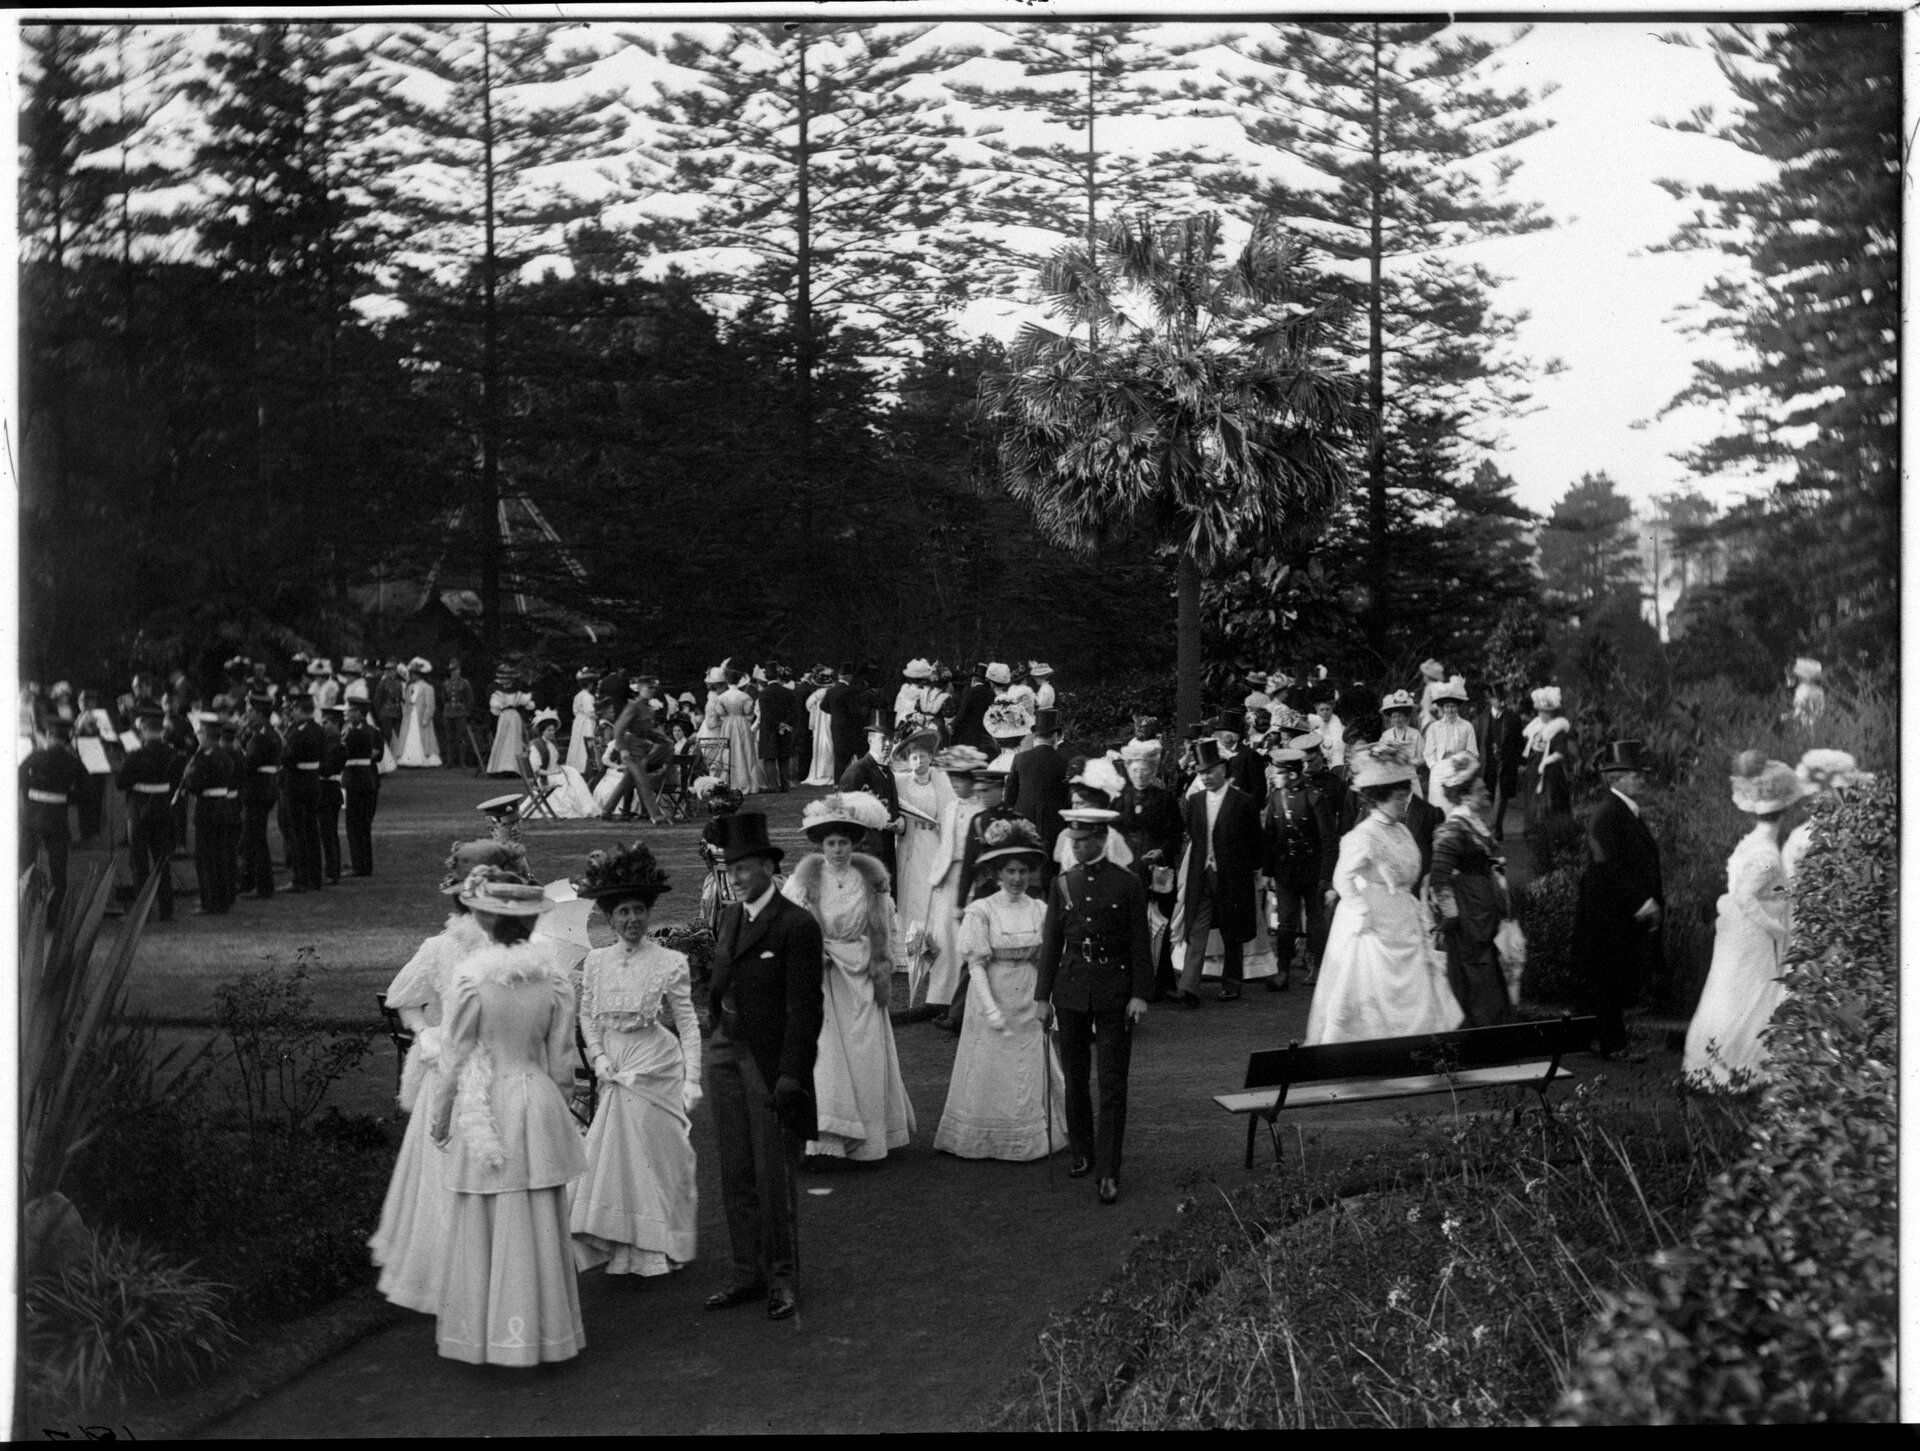 Men and women in formal attire gather outdoors at a garden party